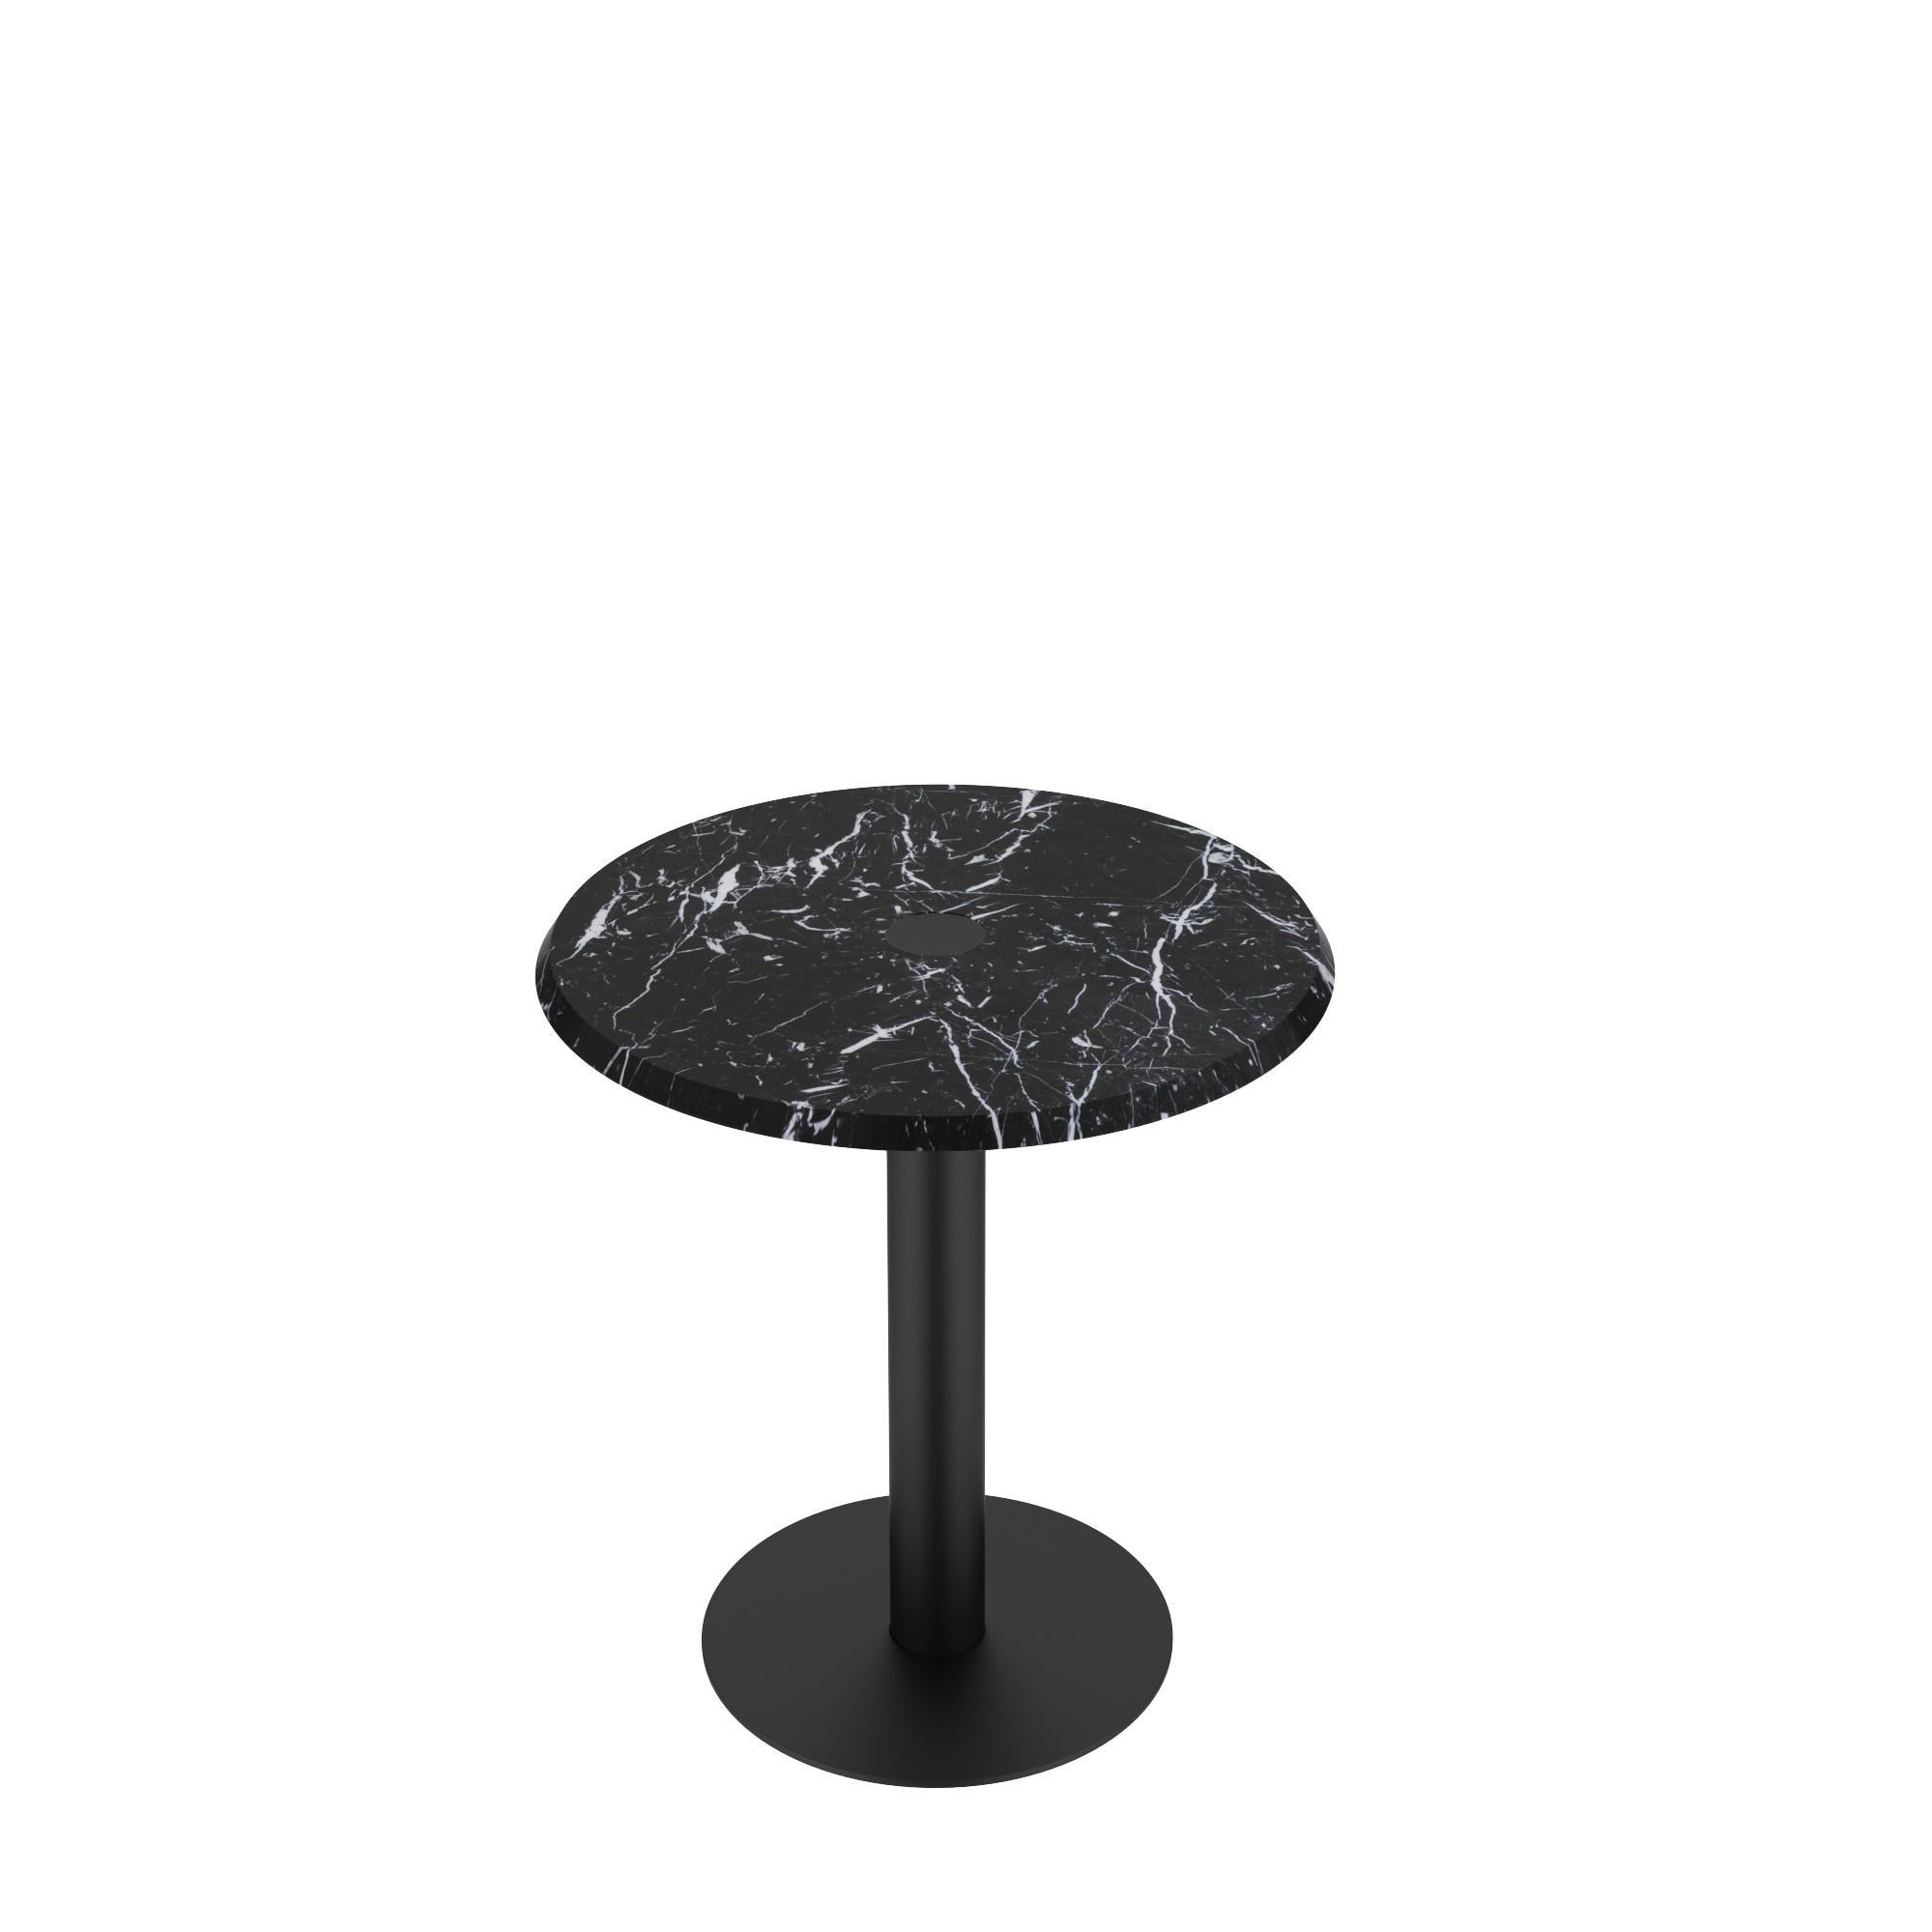 𝗣𝗿𝗼𝗱𝘂𝗰𝘁 𝗗𝗲𝘁𝗮𝗶𝗹𝘀:
Beautiful round side table with a single cylindric column frame going through the marble tabletop to expose the nicely done metalwork on the surface; furthermore, the bottom can have a matching marble piece to enhance